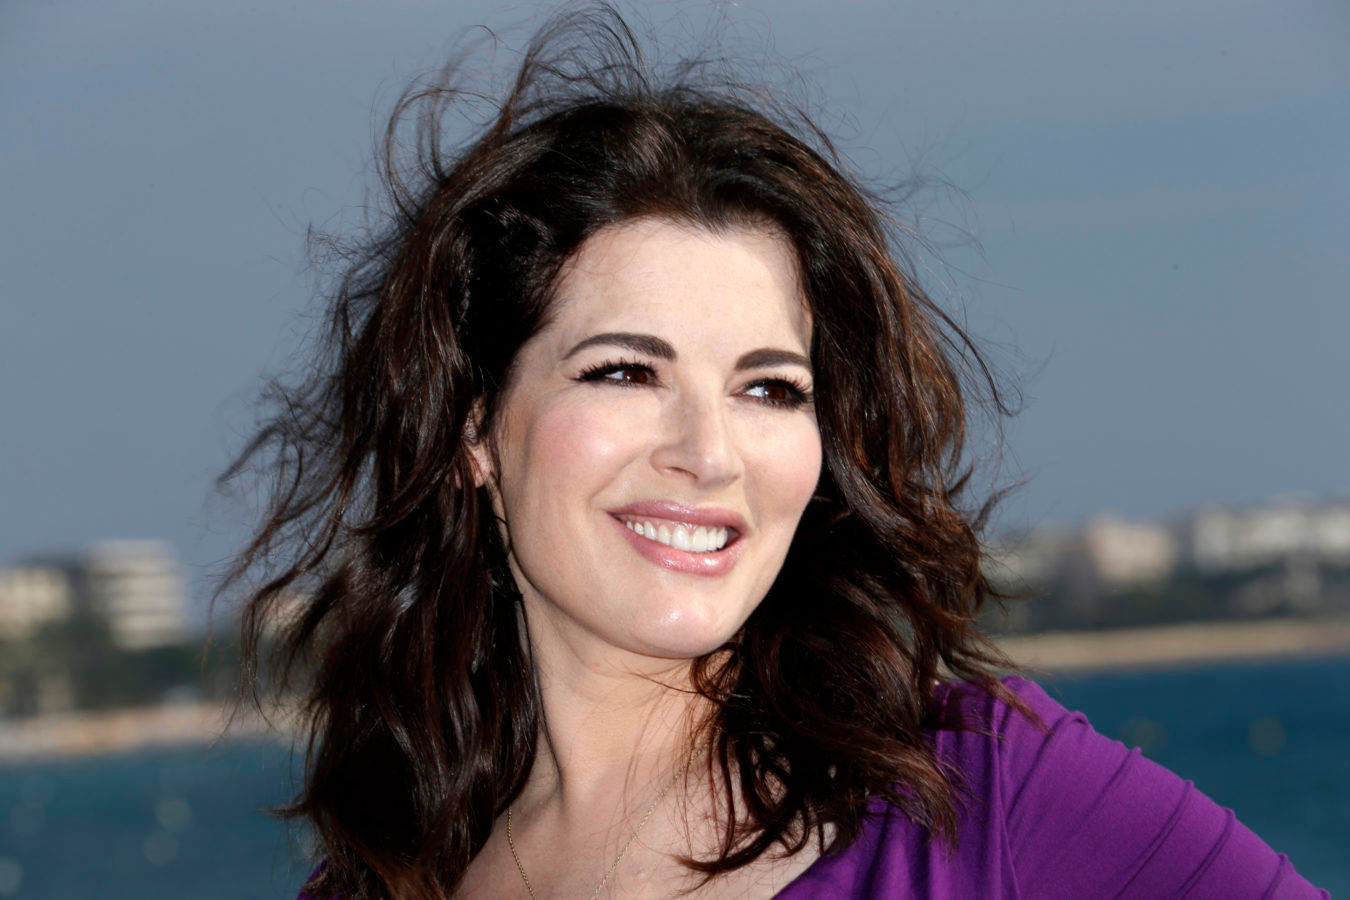 Nigella Lawson launches online #RecipeOfTheDay series for at-home cooks